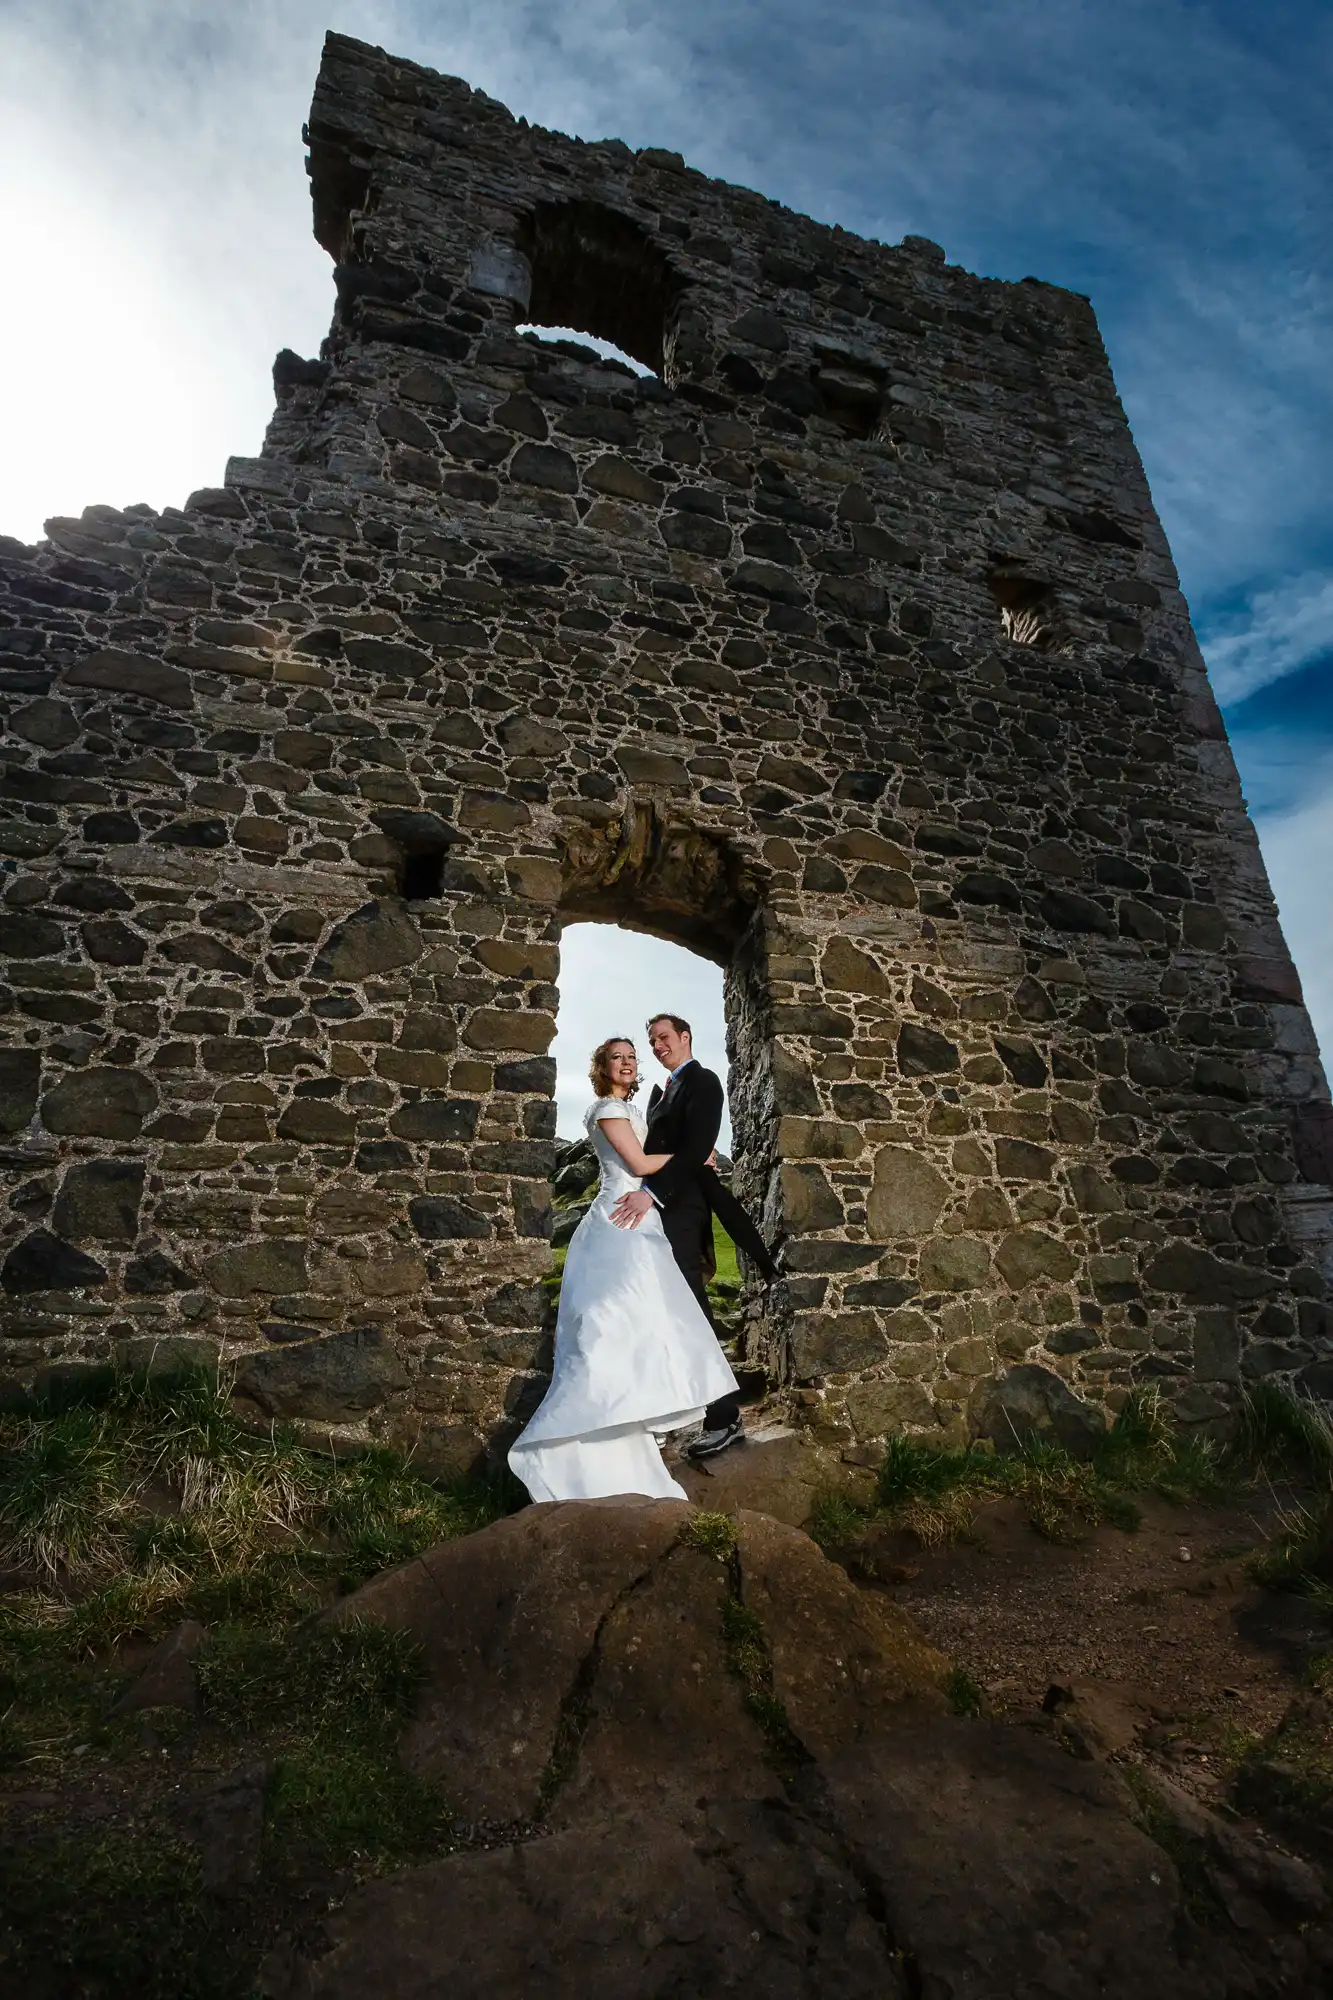 A bride and groom posing in the doorway of an ancient stone tower under a bright blue sky.